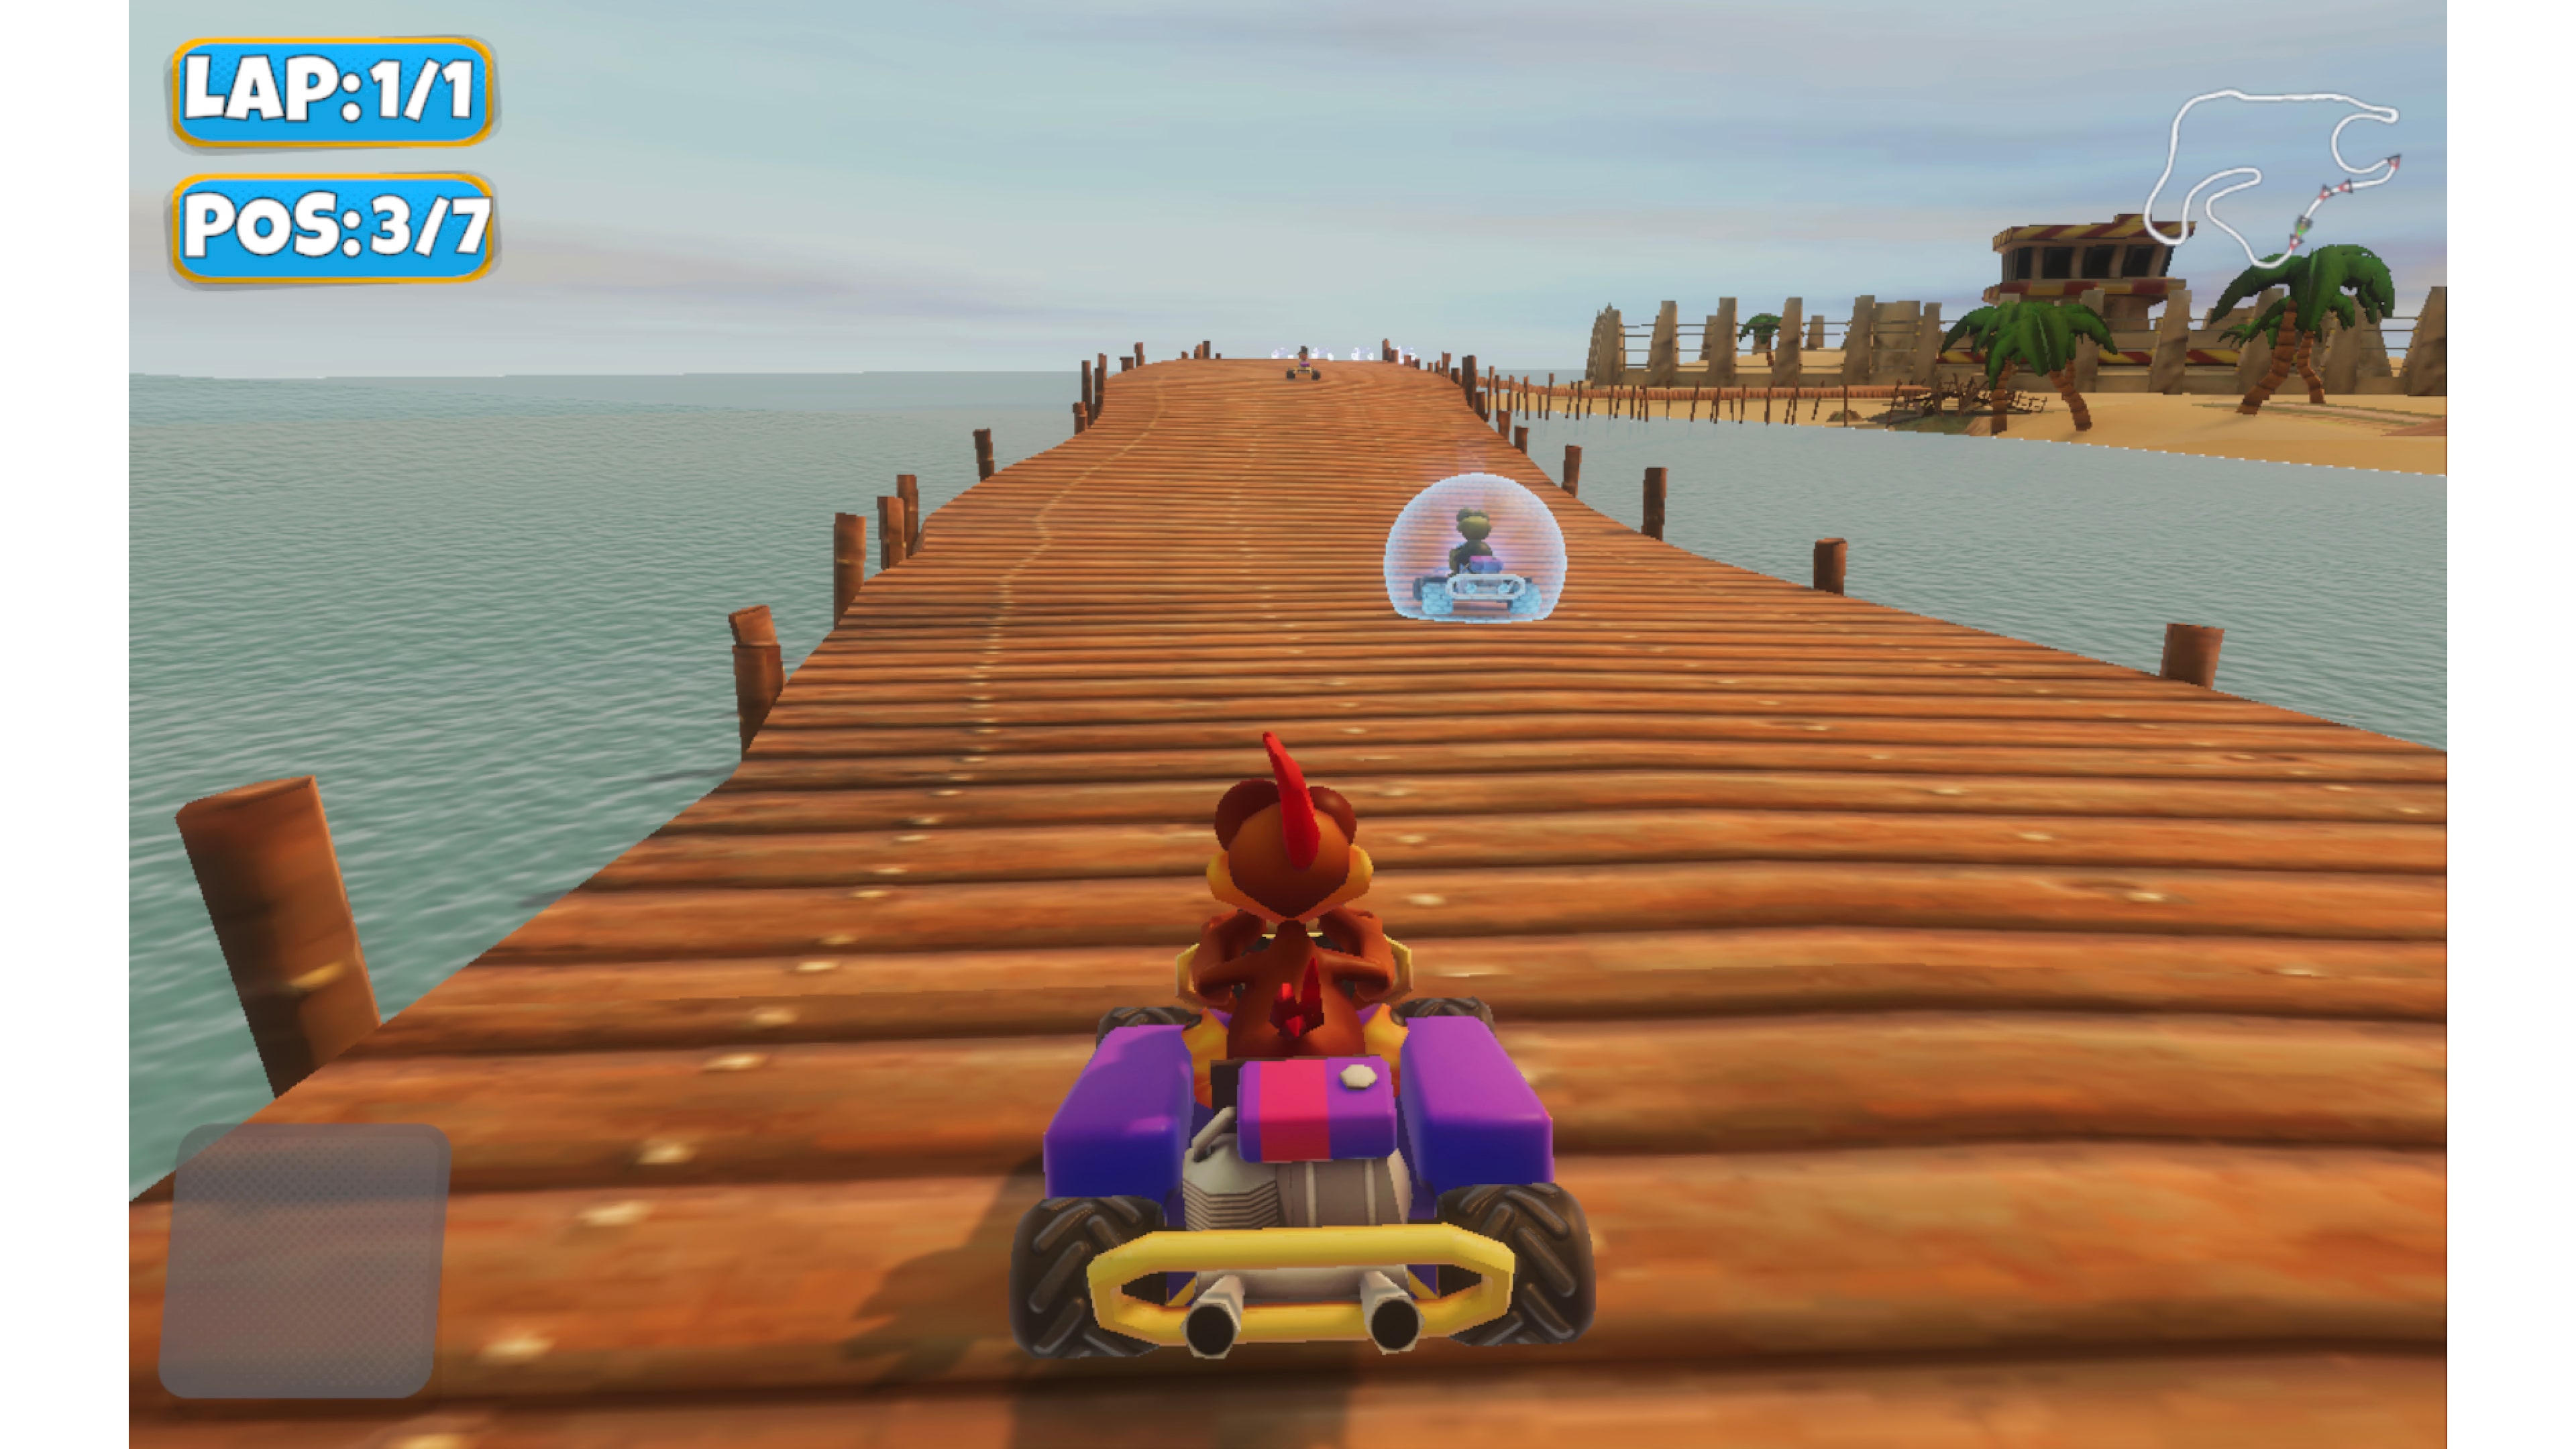 Crazy Chicken Kart 2 PS4 Review: A Poor Yet Fascinating Racer